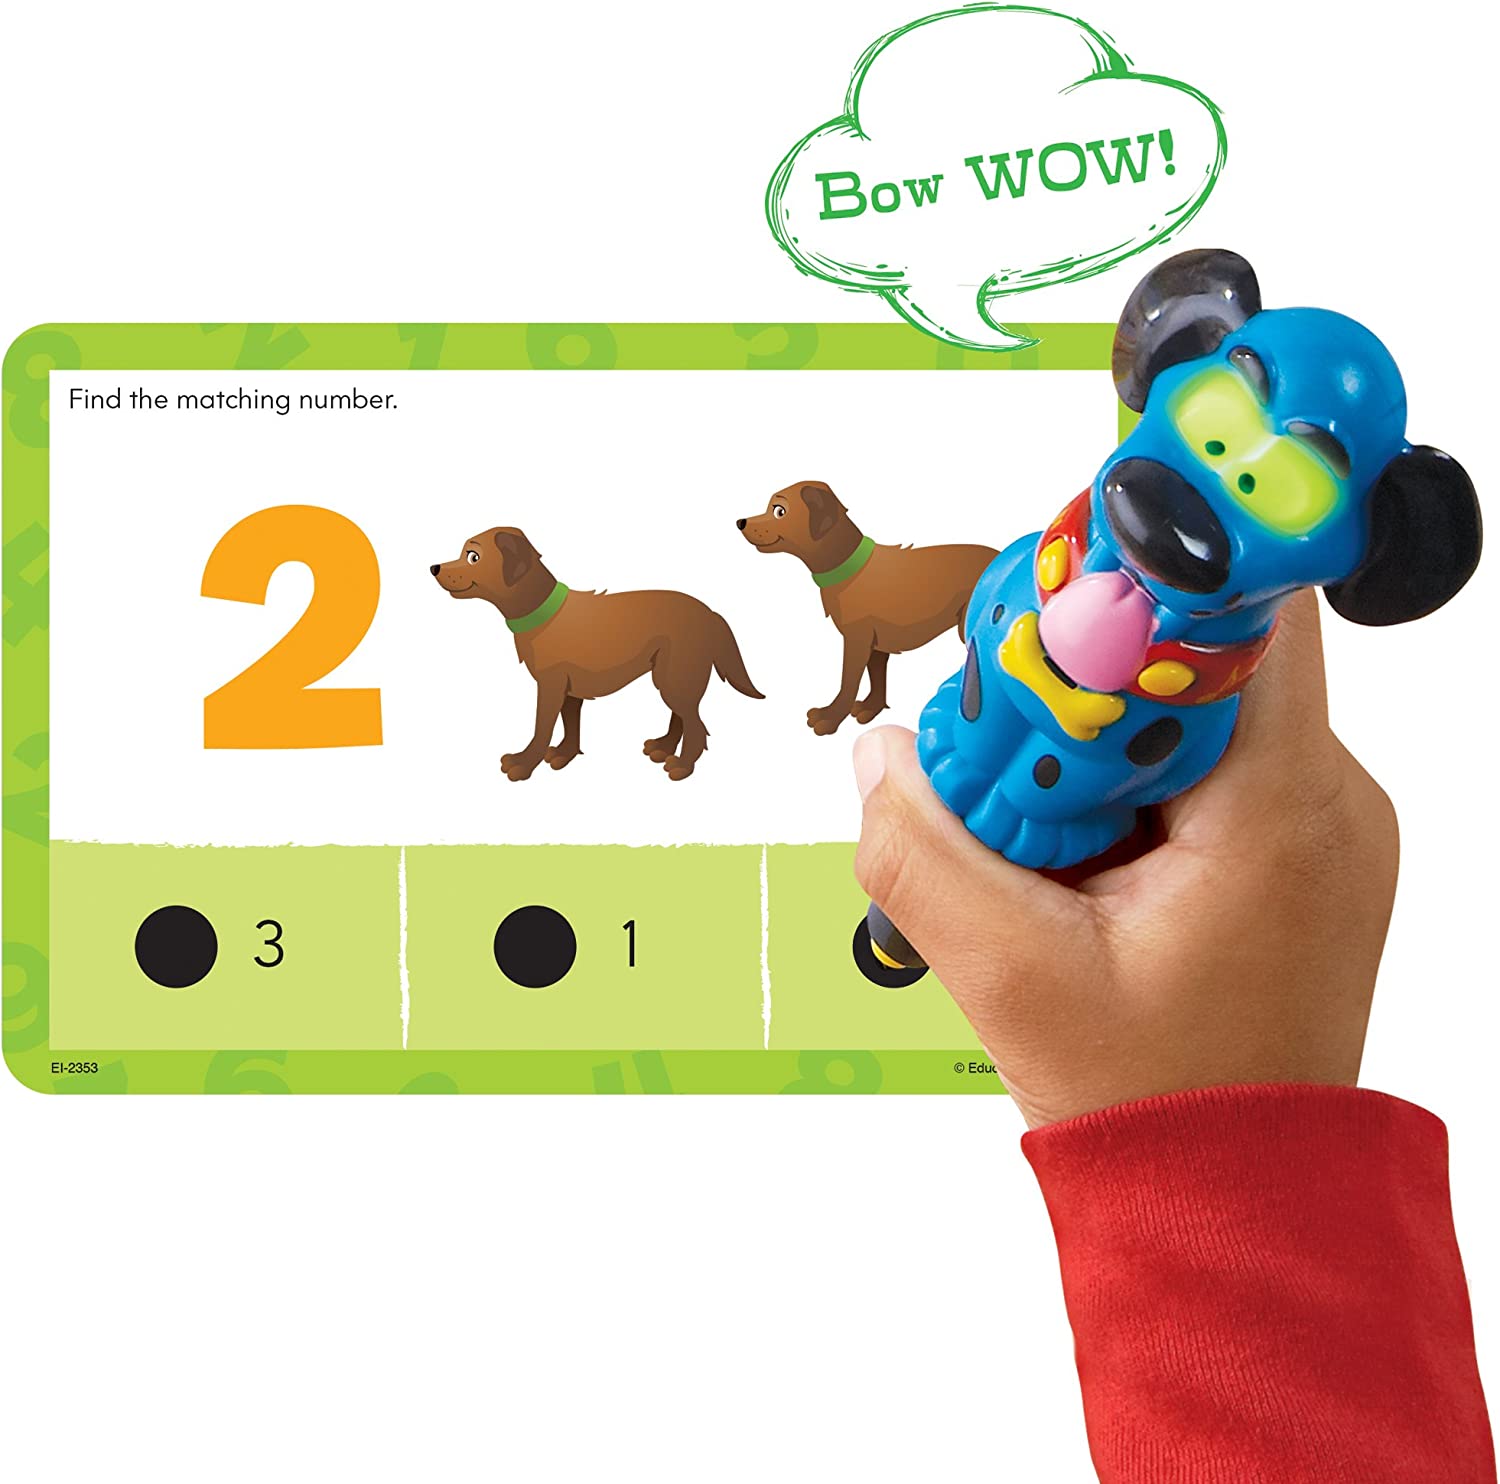 Educational Insights Hot Dots Jr. Numbers and Counting Card Set, Preschool and Kindergarten Readiness